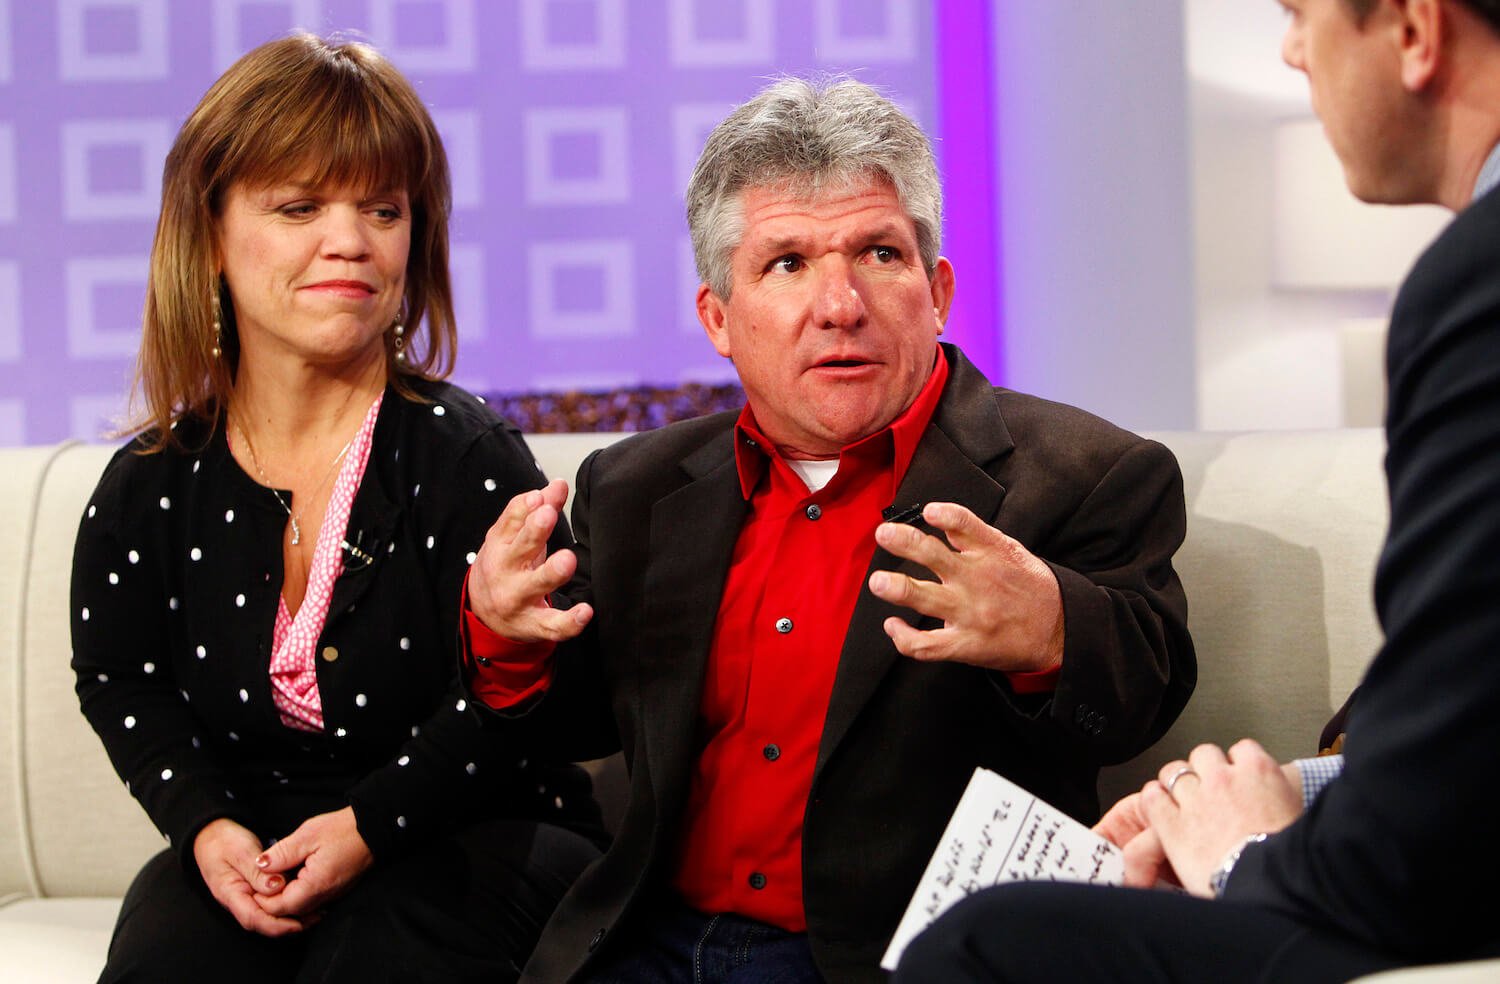 Amy and Matt Roloff from 'Little People, Big World' on a couch during an interview